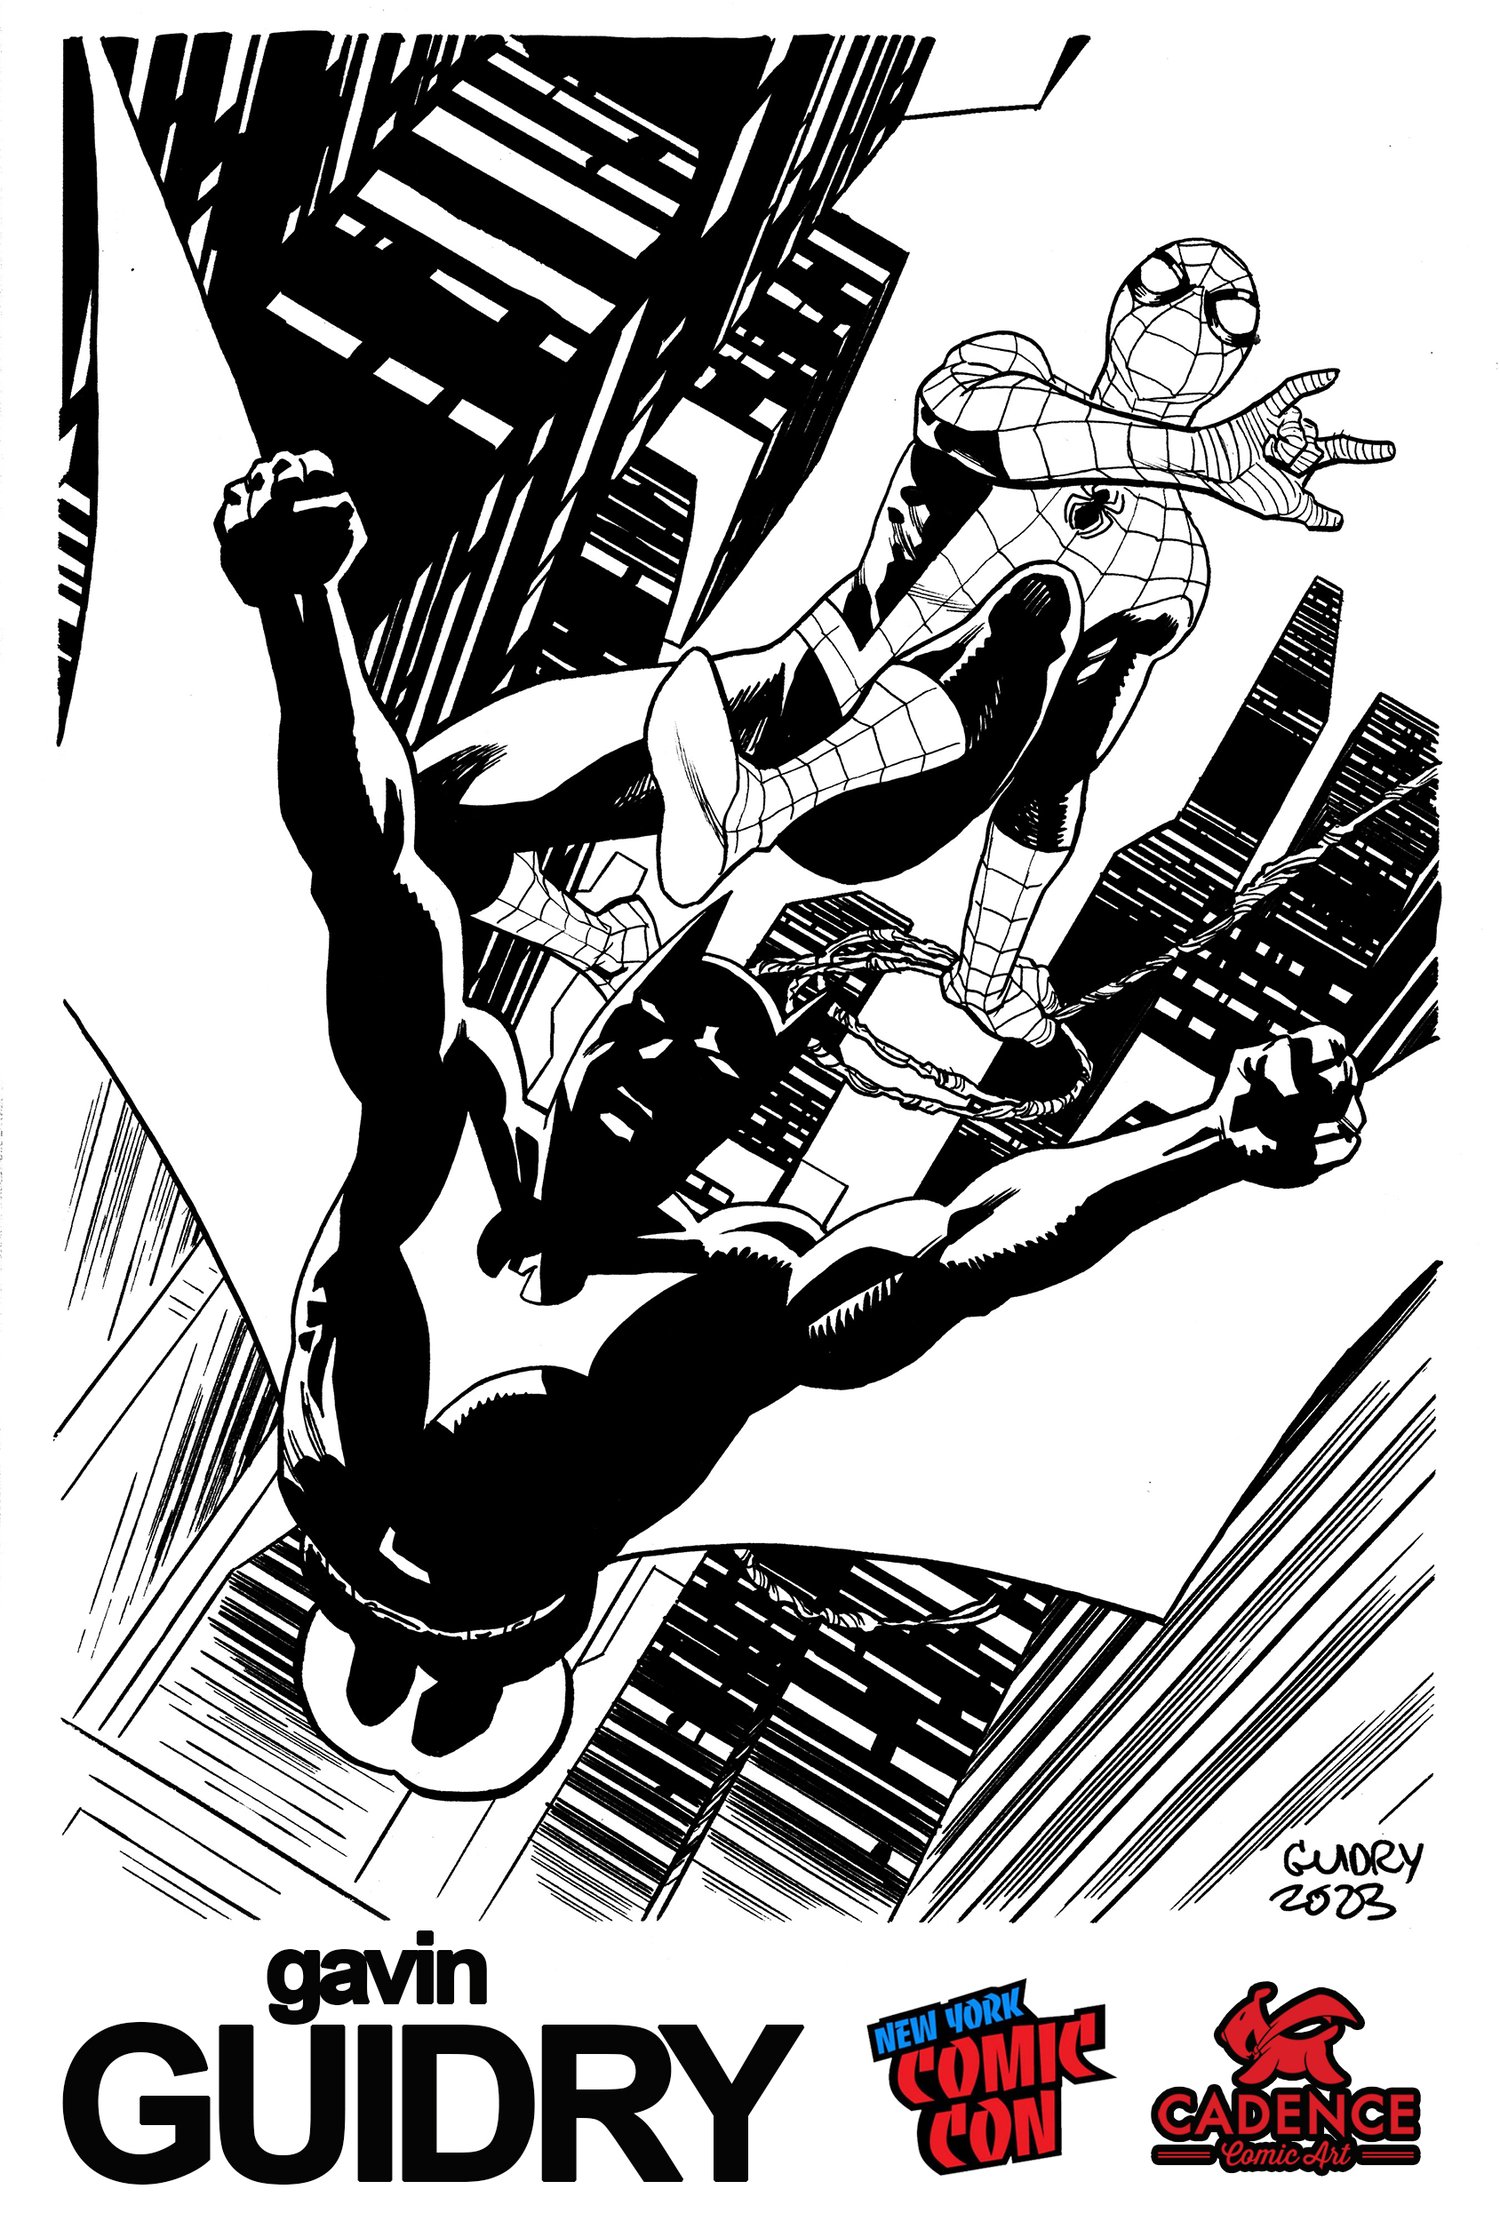 Image of Gavin Guidry: NYCC 2023 Commissions (Mail Order Available) Opens 9/11 at 1PM EST